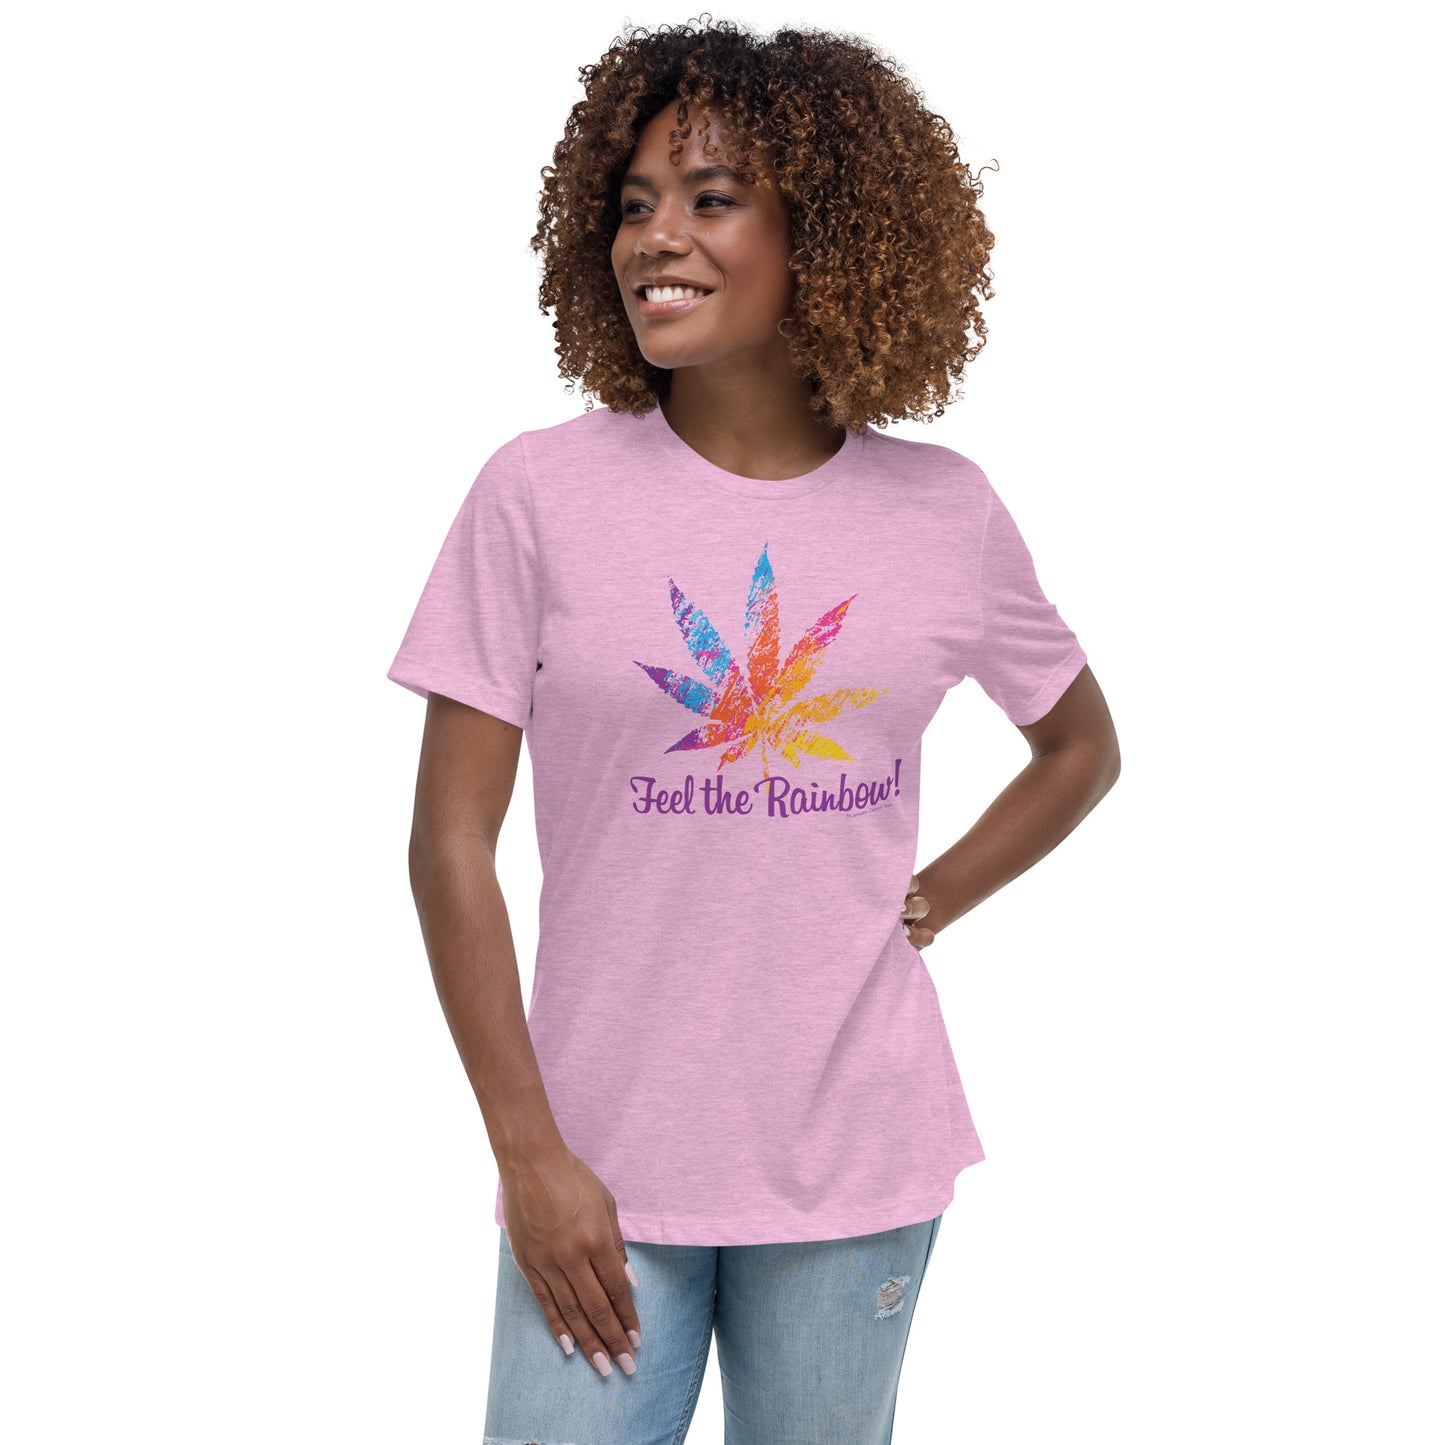 Feel the Rainbow Women's Relaxed T-Shirt